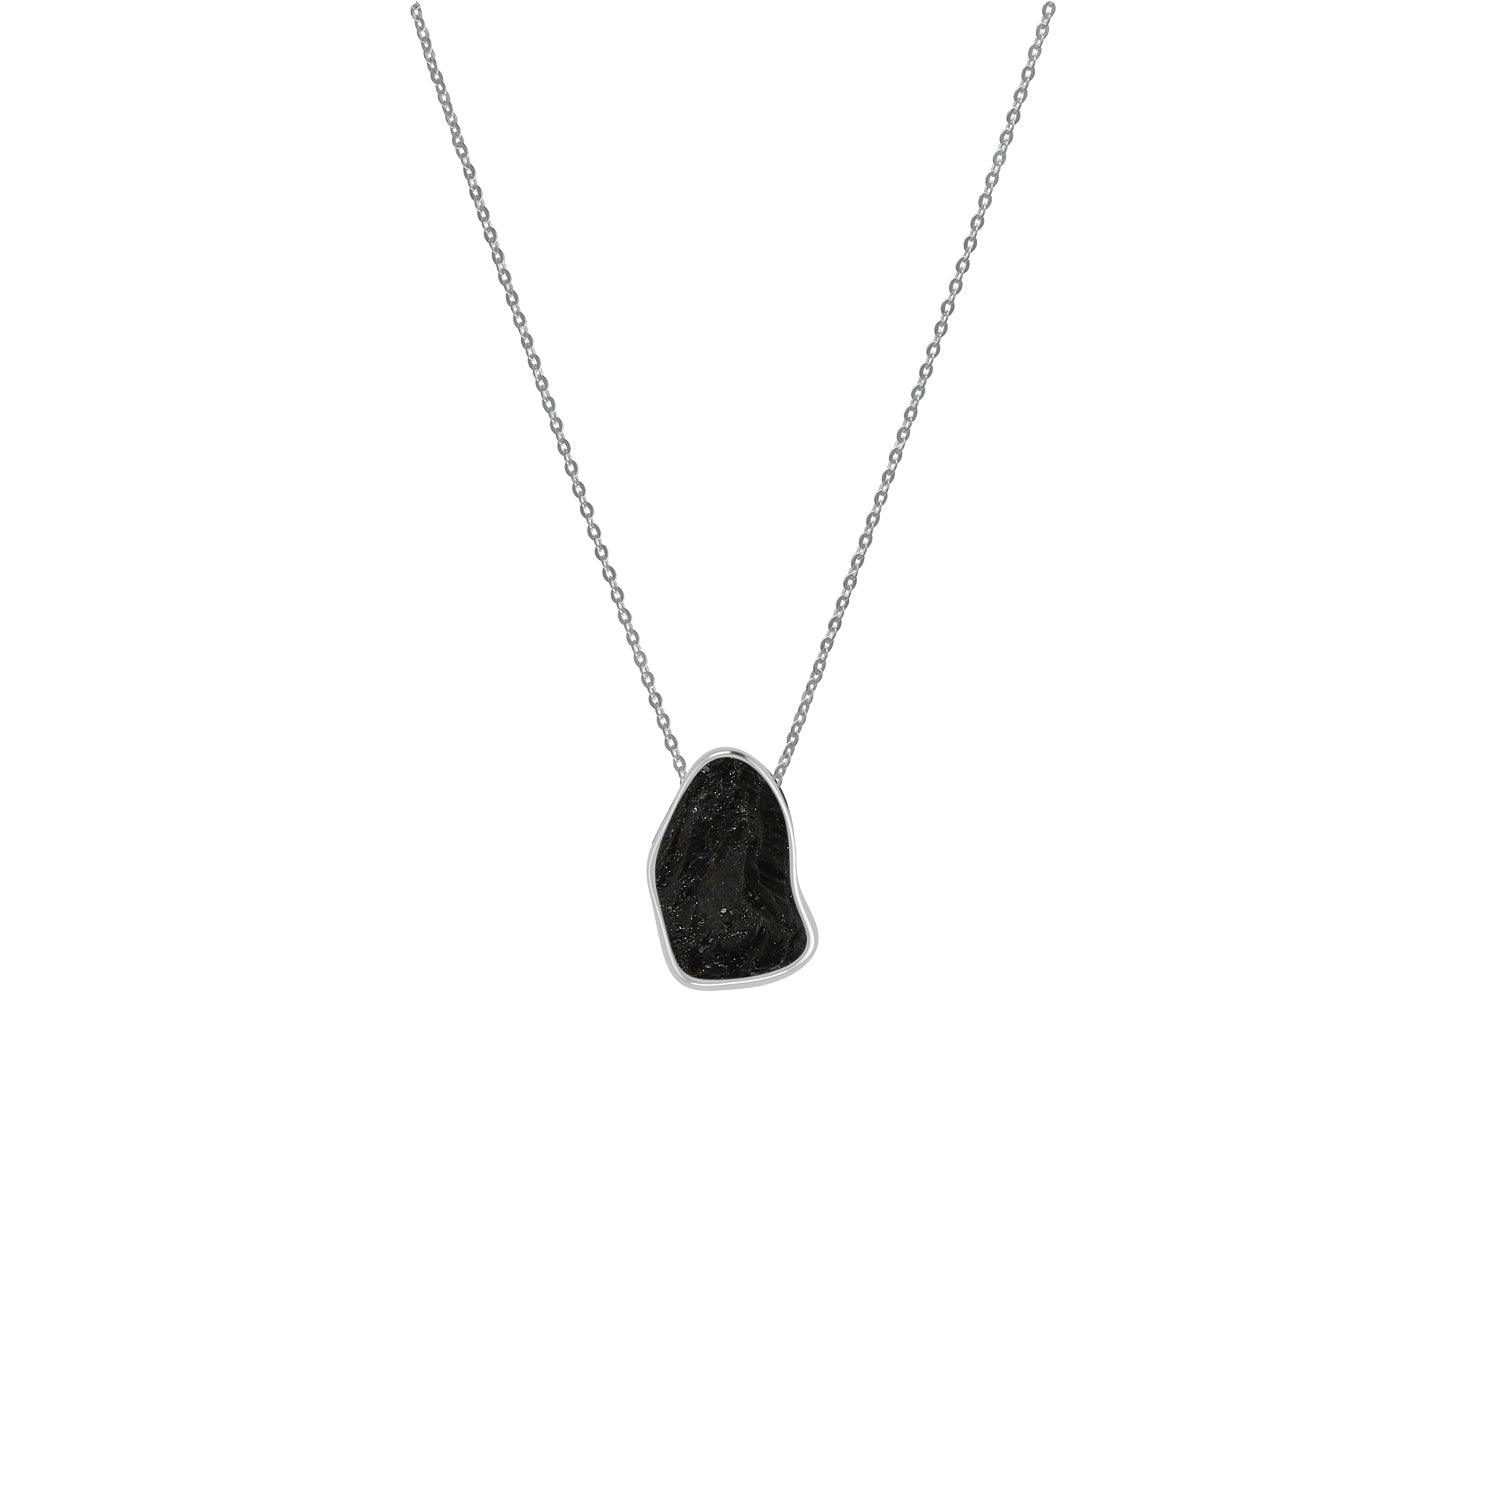 925 Sterling Silver Rough Black Tourmaline Slider Necklace With Chain 18" Bezel Set Jewelry Pack of 6